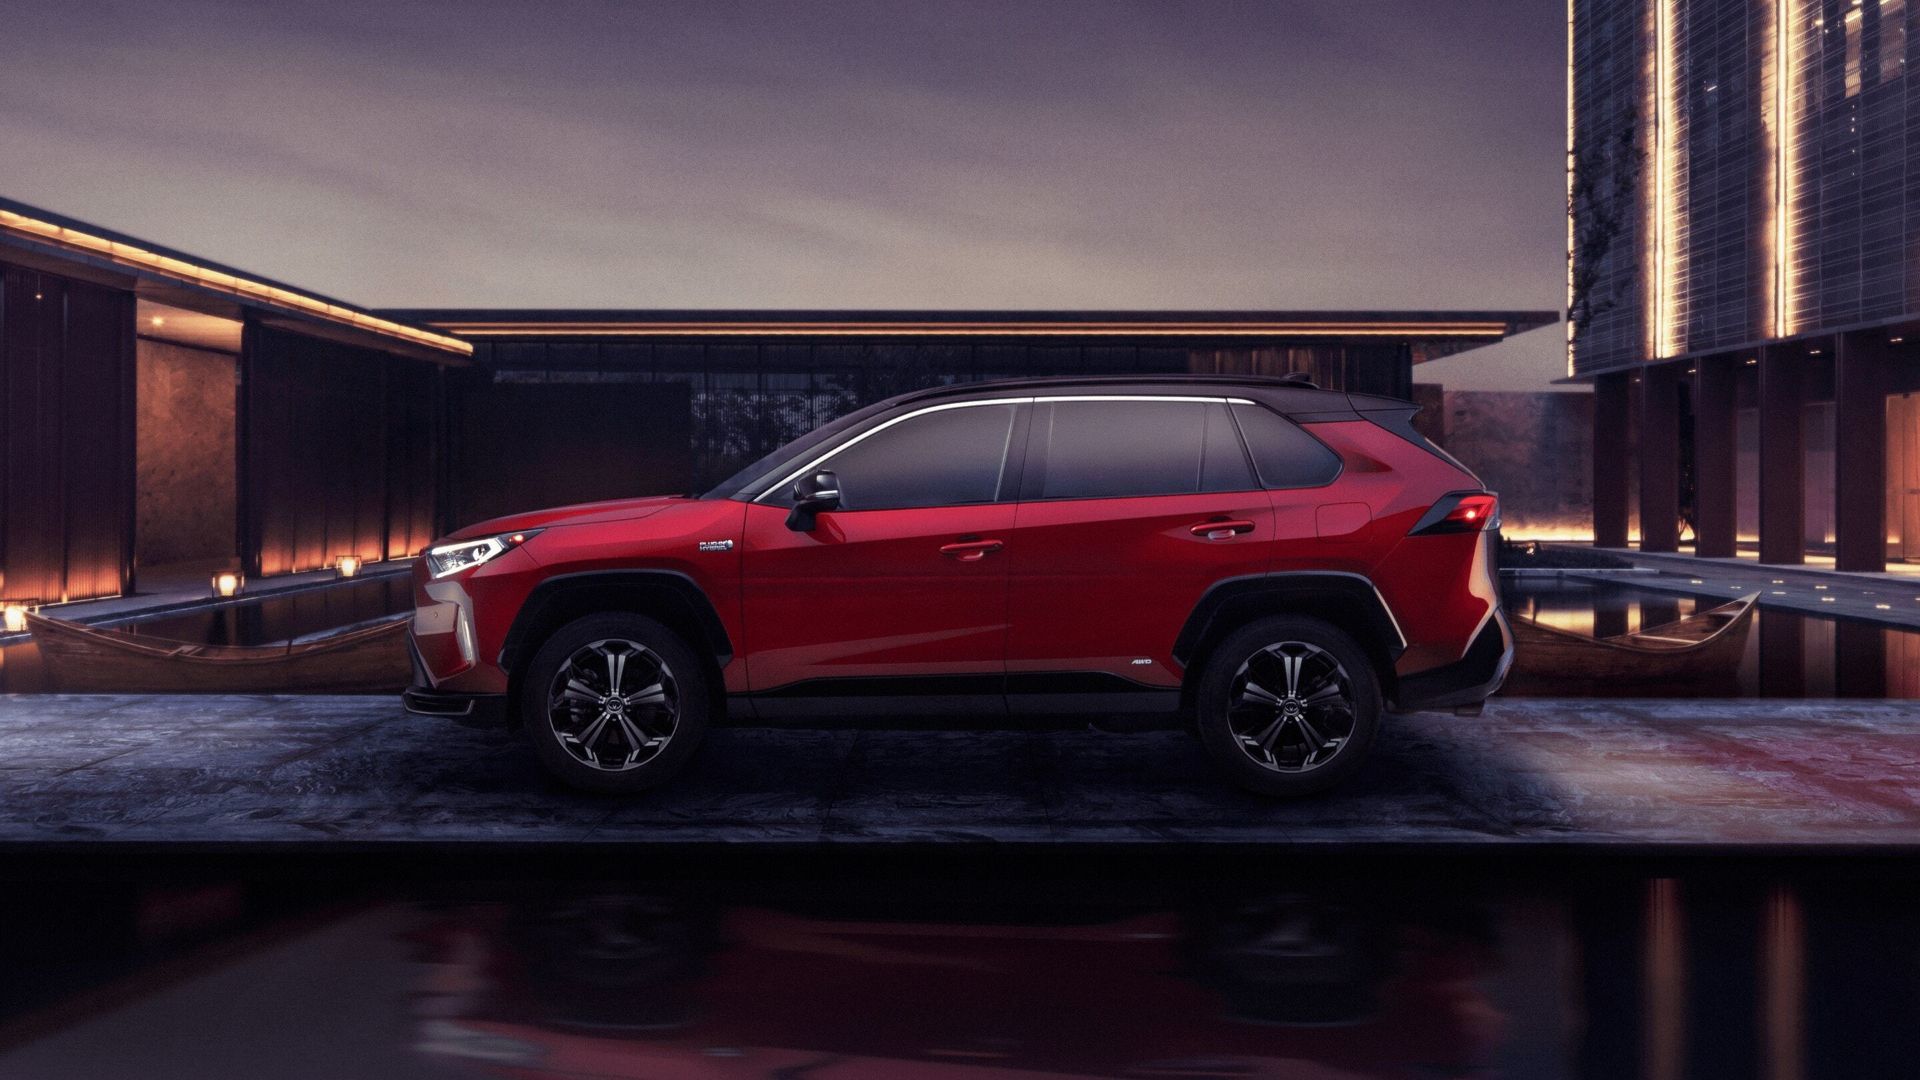 Learn more about the upcoming 2021 Toyota RAV4 Prime in Longueuil